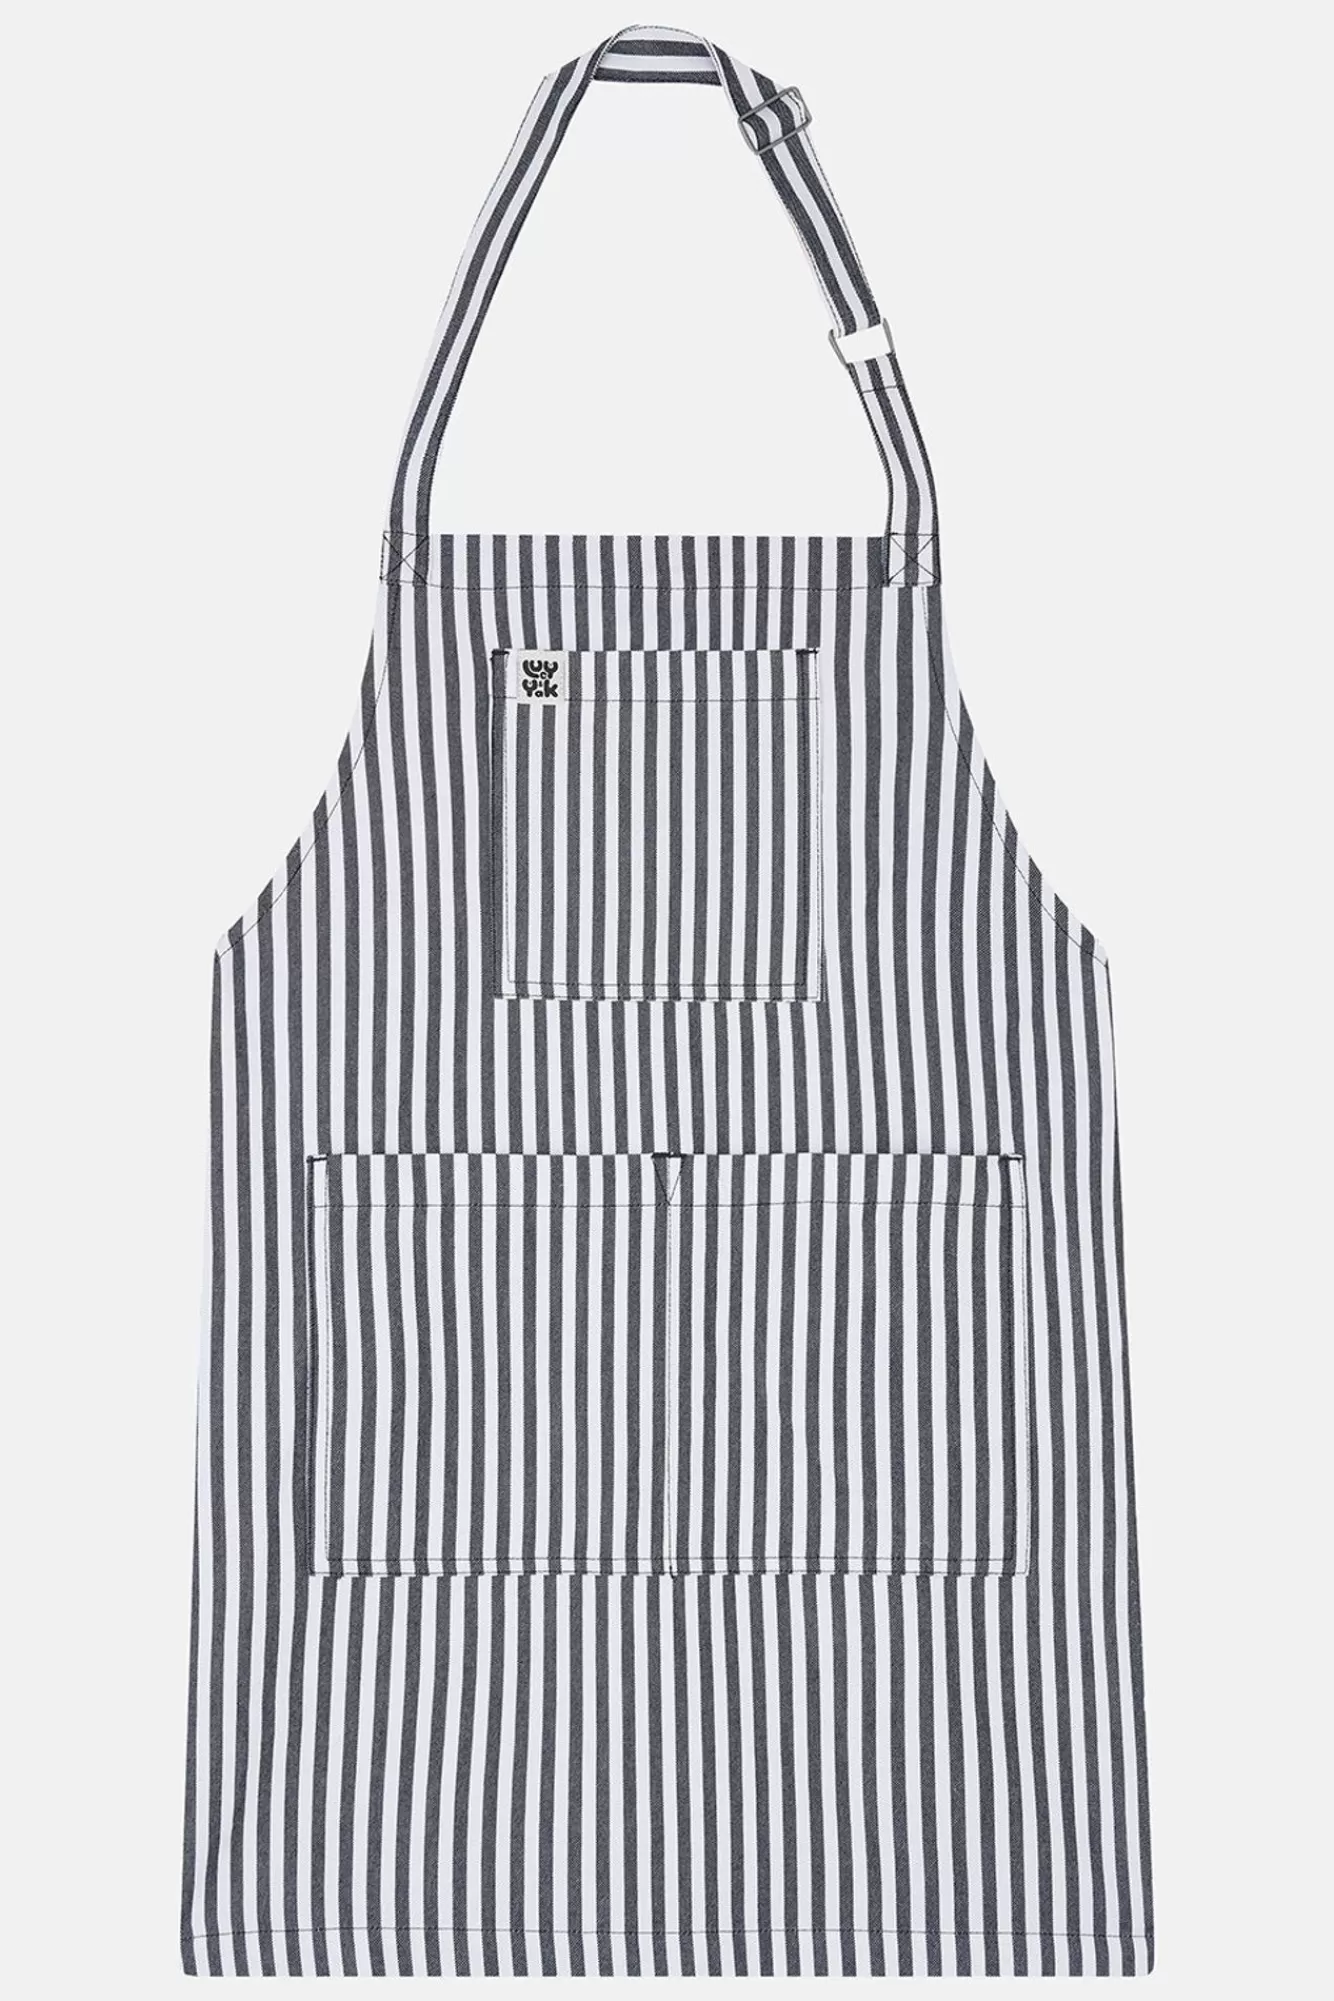 Ada Apron: Deadstock Fabric - Black & White Stripe-Lucy & Yak Outlet